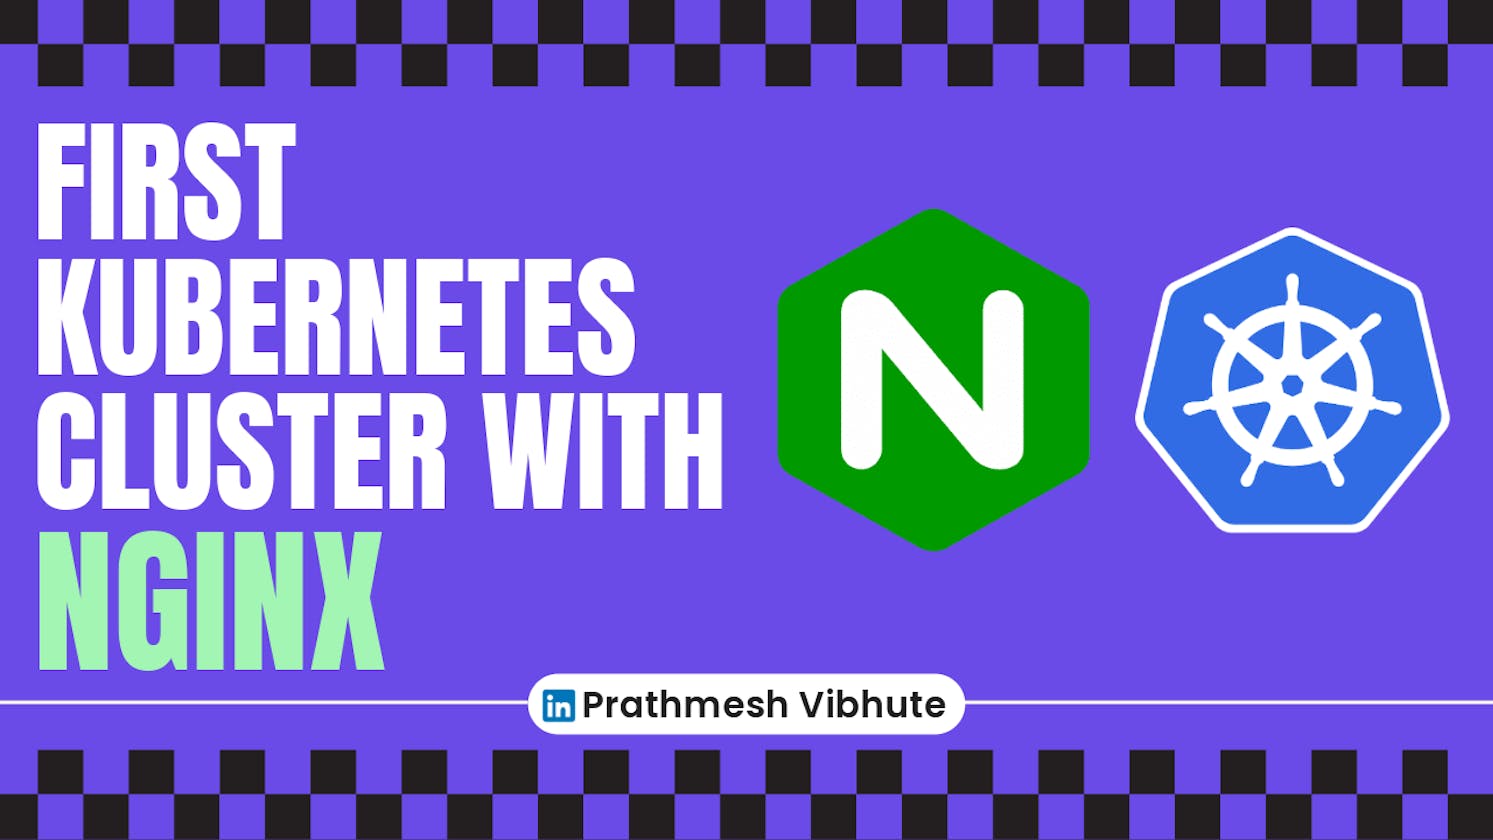 Day 31 : Launching your First Kubernetes Cluster with Nginx running